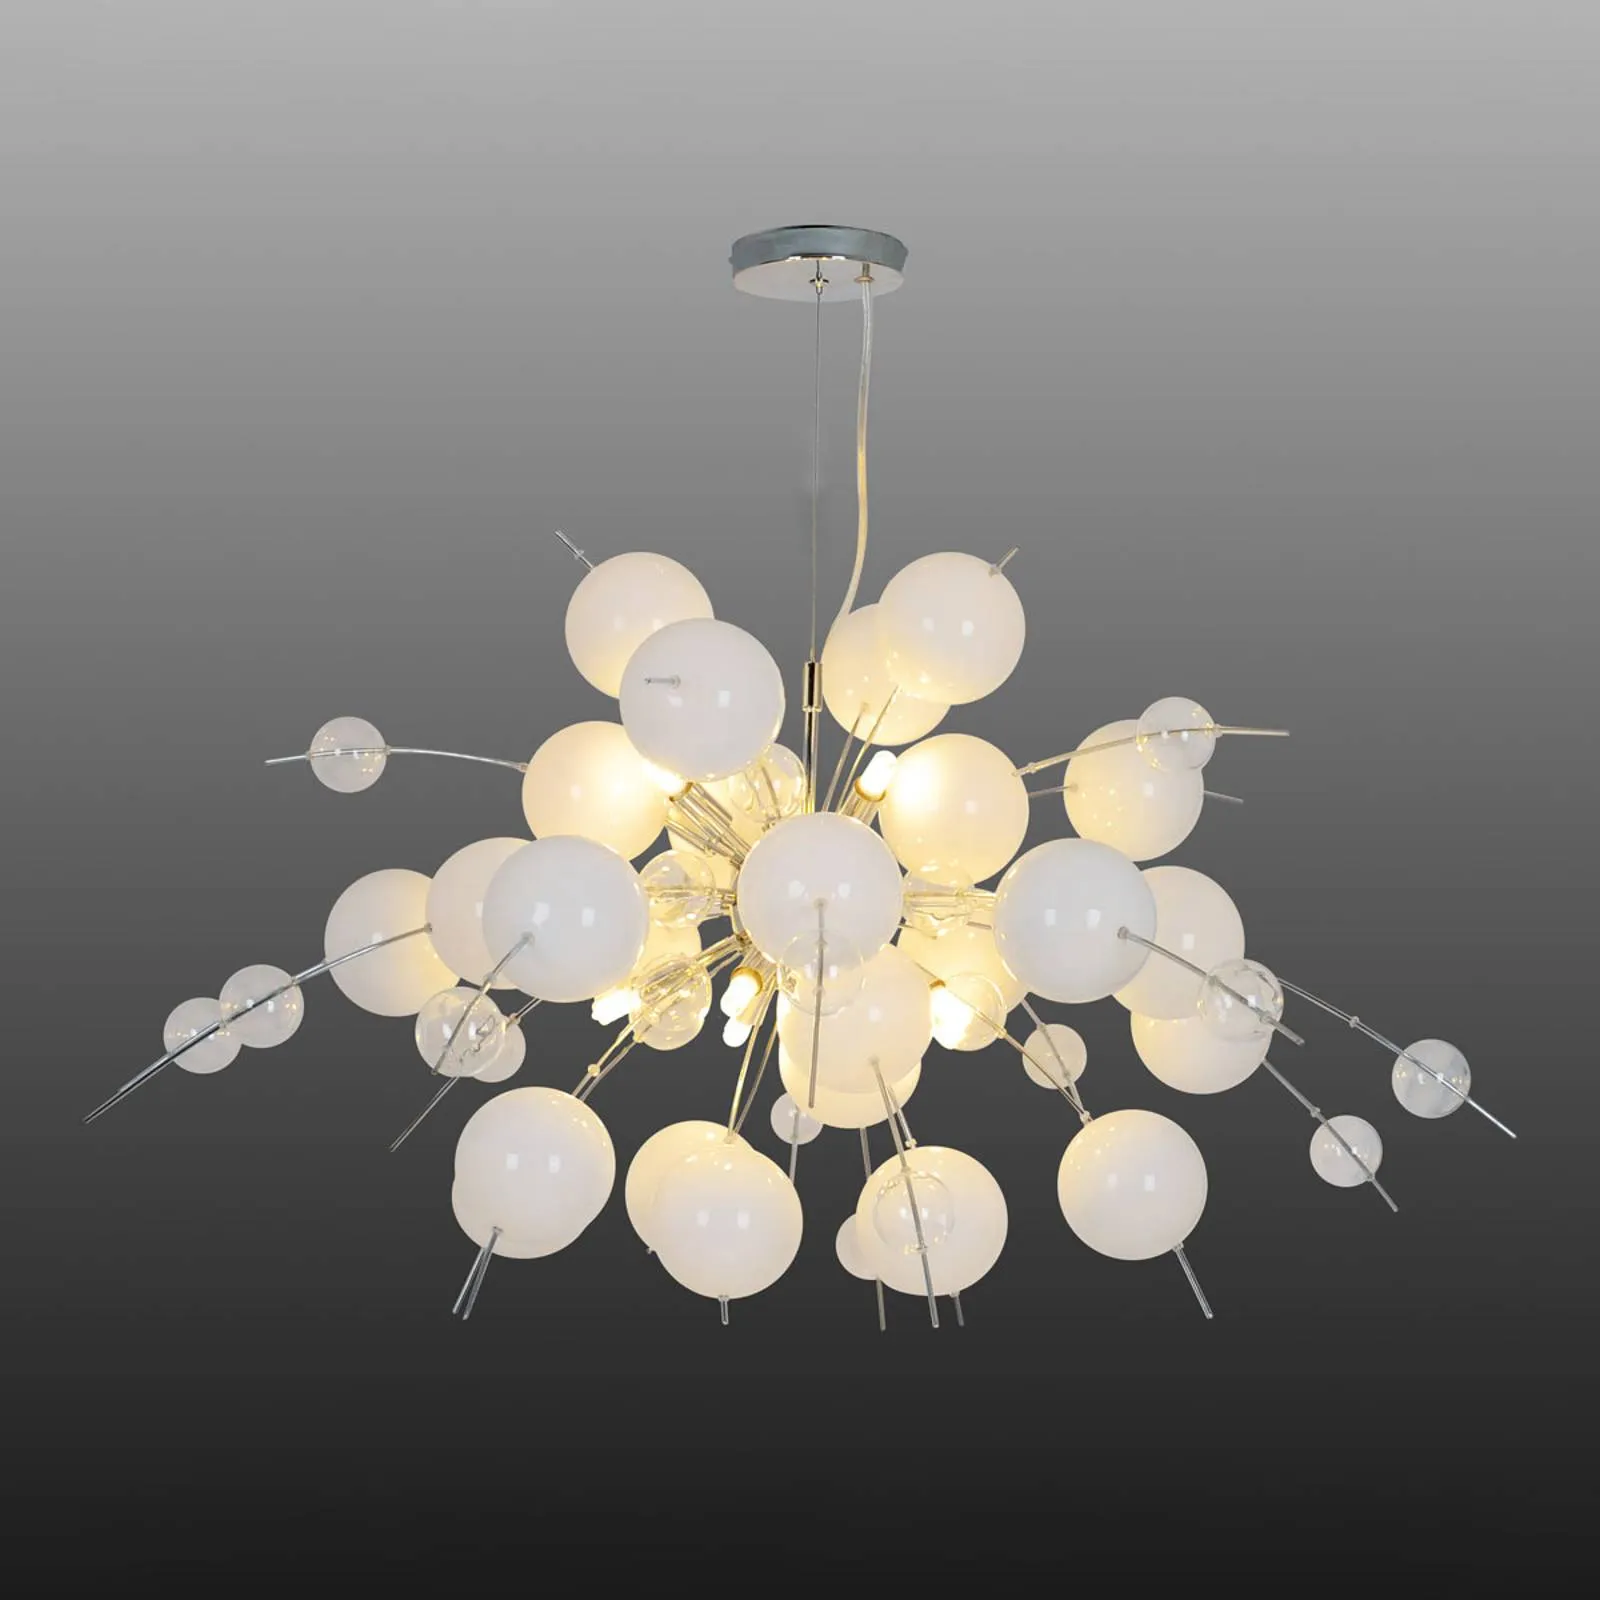 Explosion hanging light in white and chrome 98cm